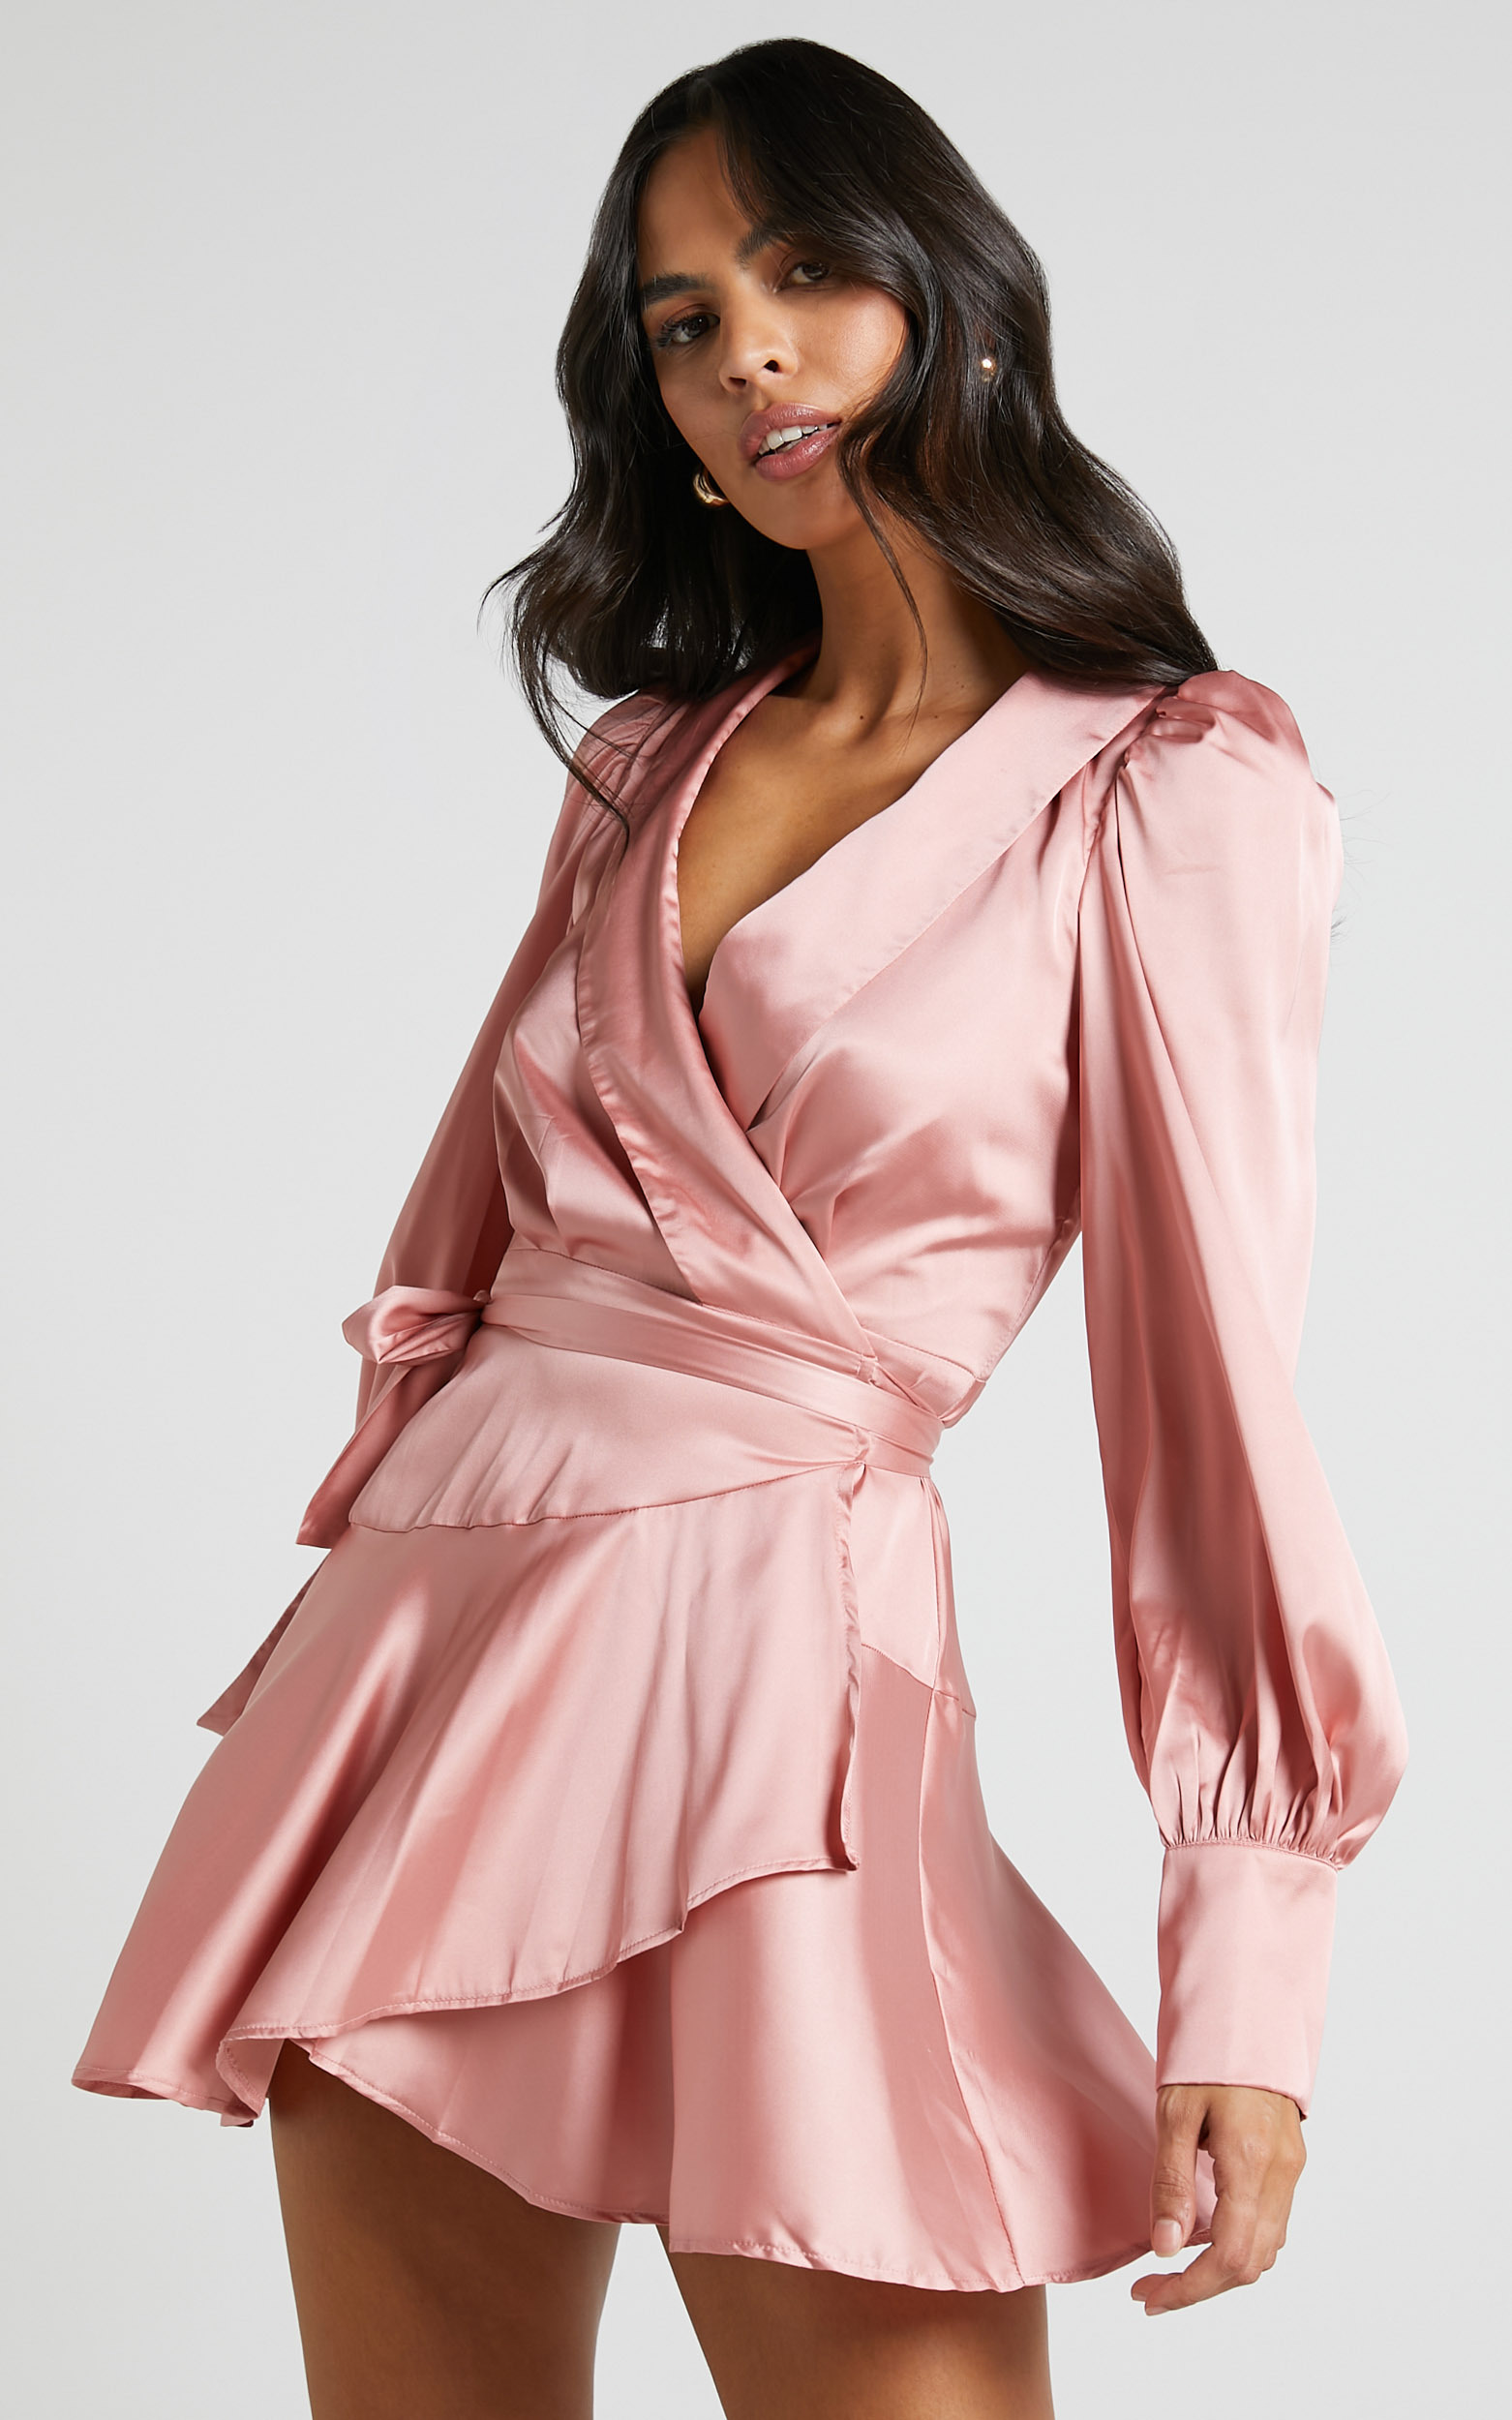 Breeana Wrap Mini Dress in Dusty Pink - 04, PNK1, hi-res image number null